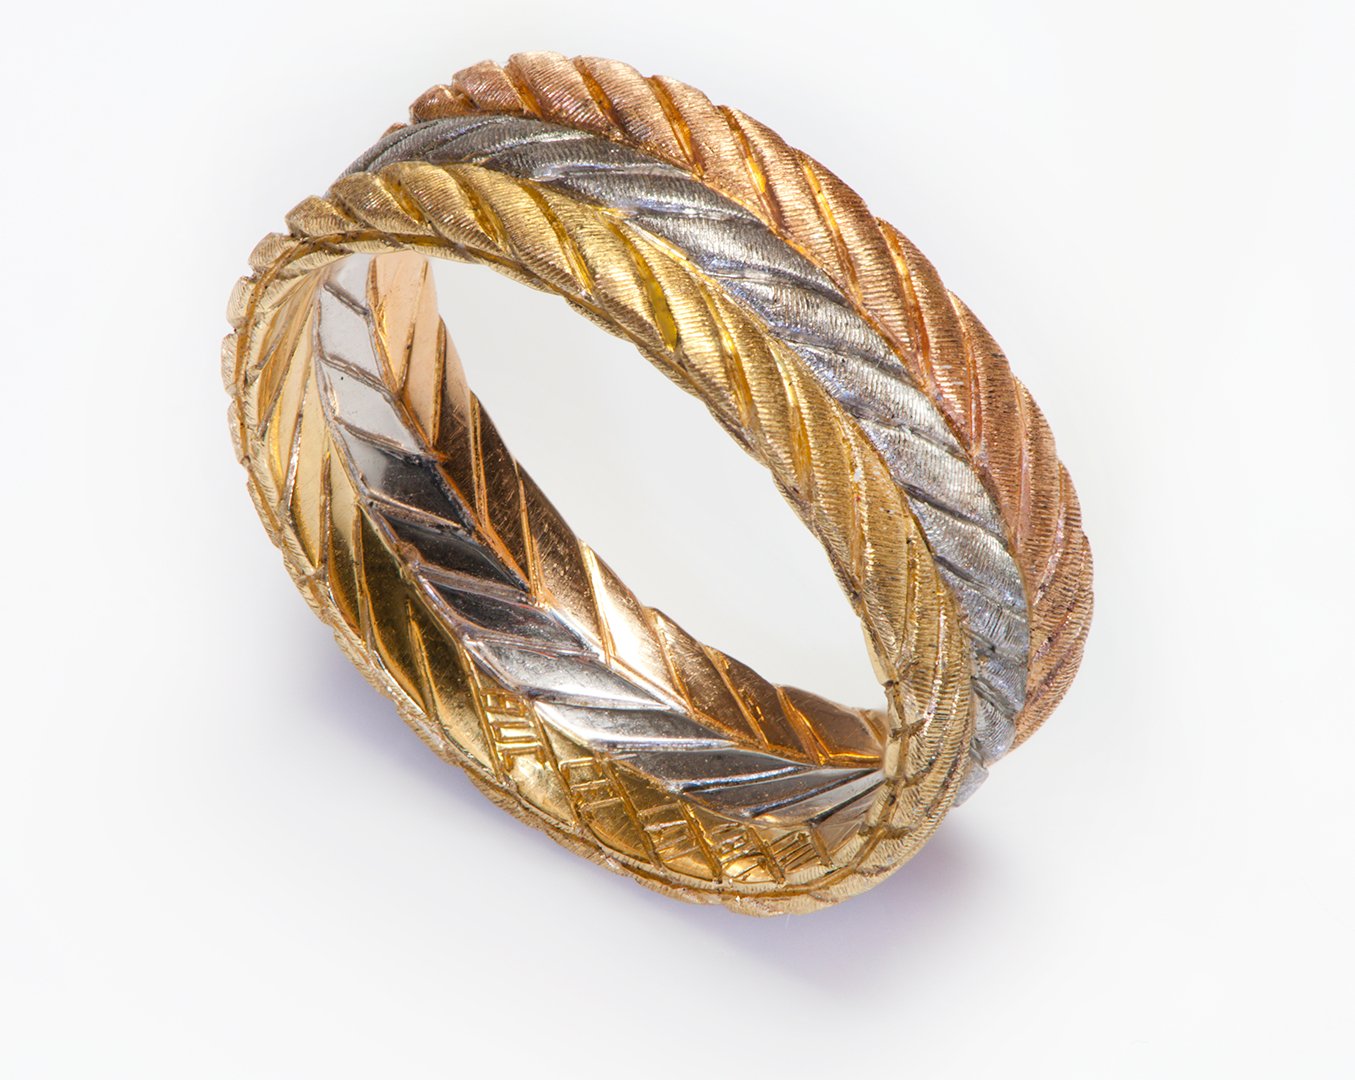 Buccellati 18K Tri-Color Gold Braided Eternity Band Ring